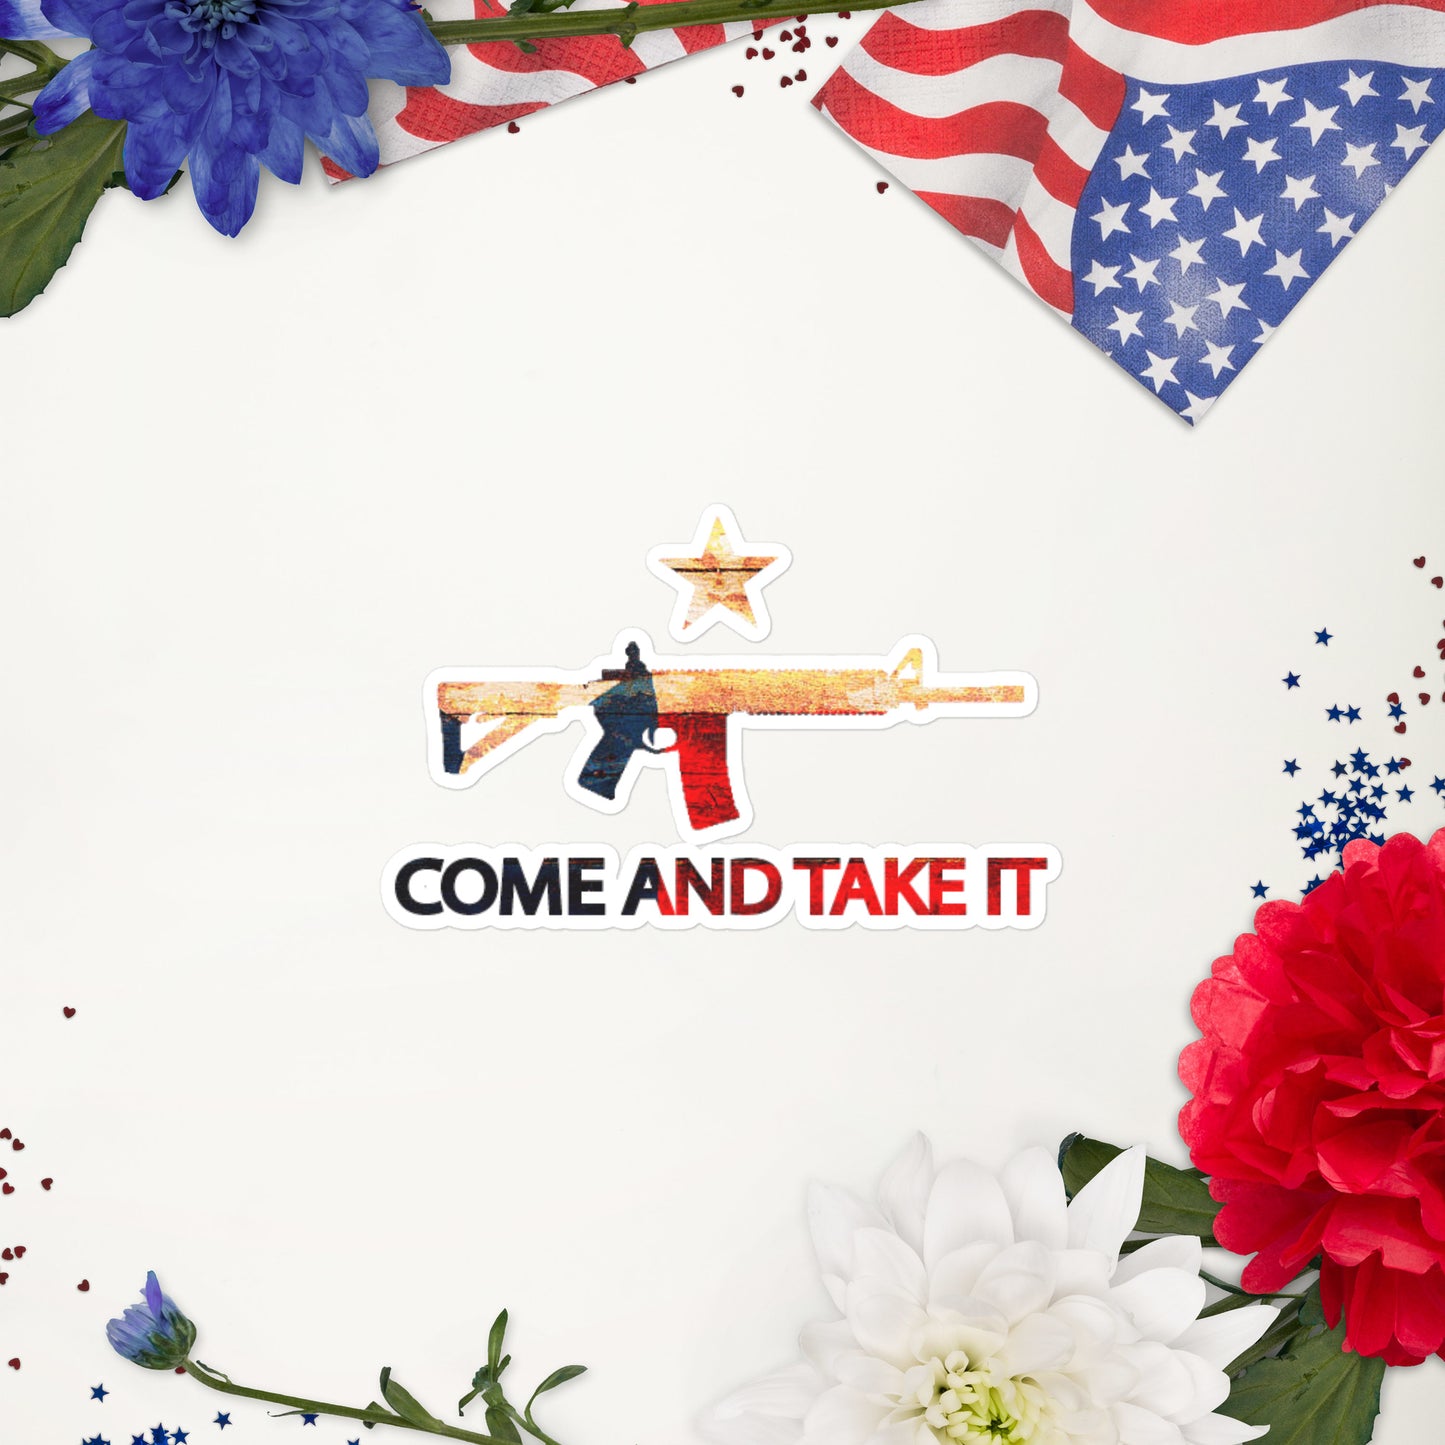 Come And Take It! (Texas Flag) Bubble-free stickers